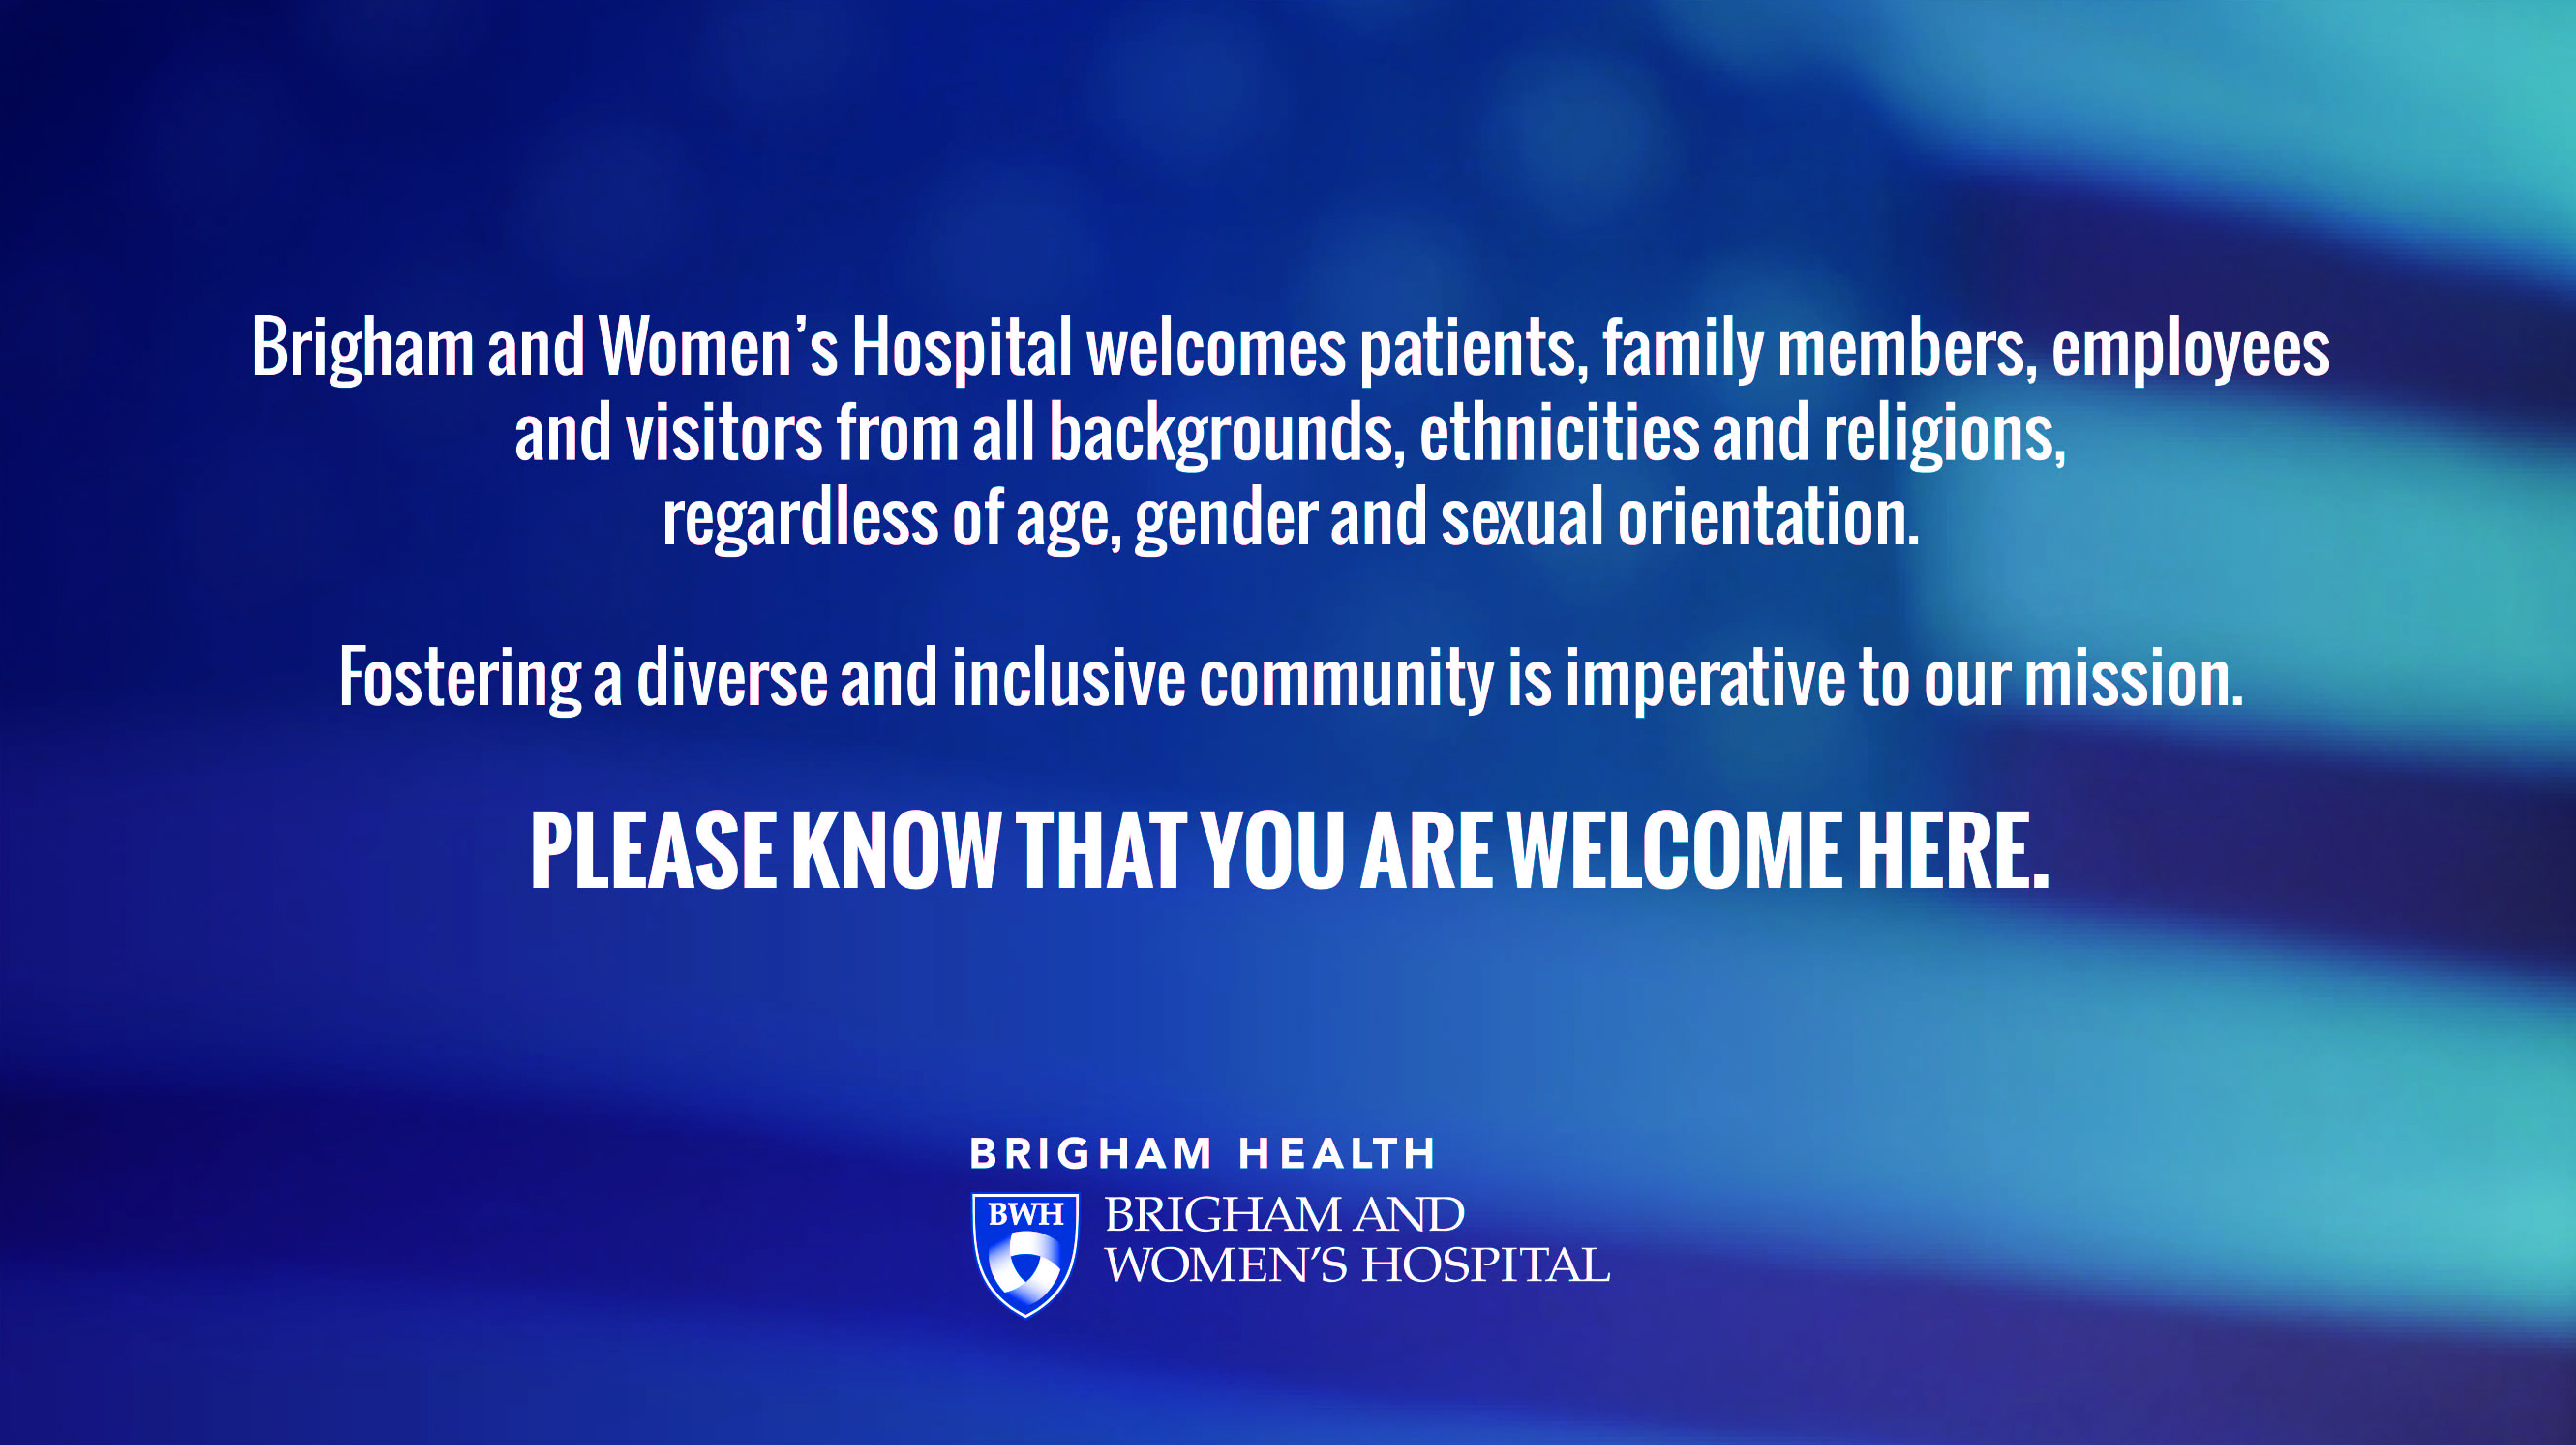 This message of welcoming displays on the BWH Community Connects digital screens around the hospital.